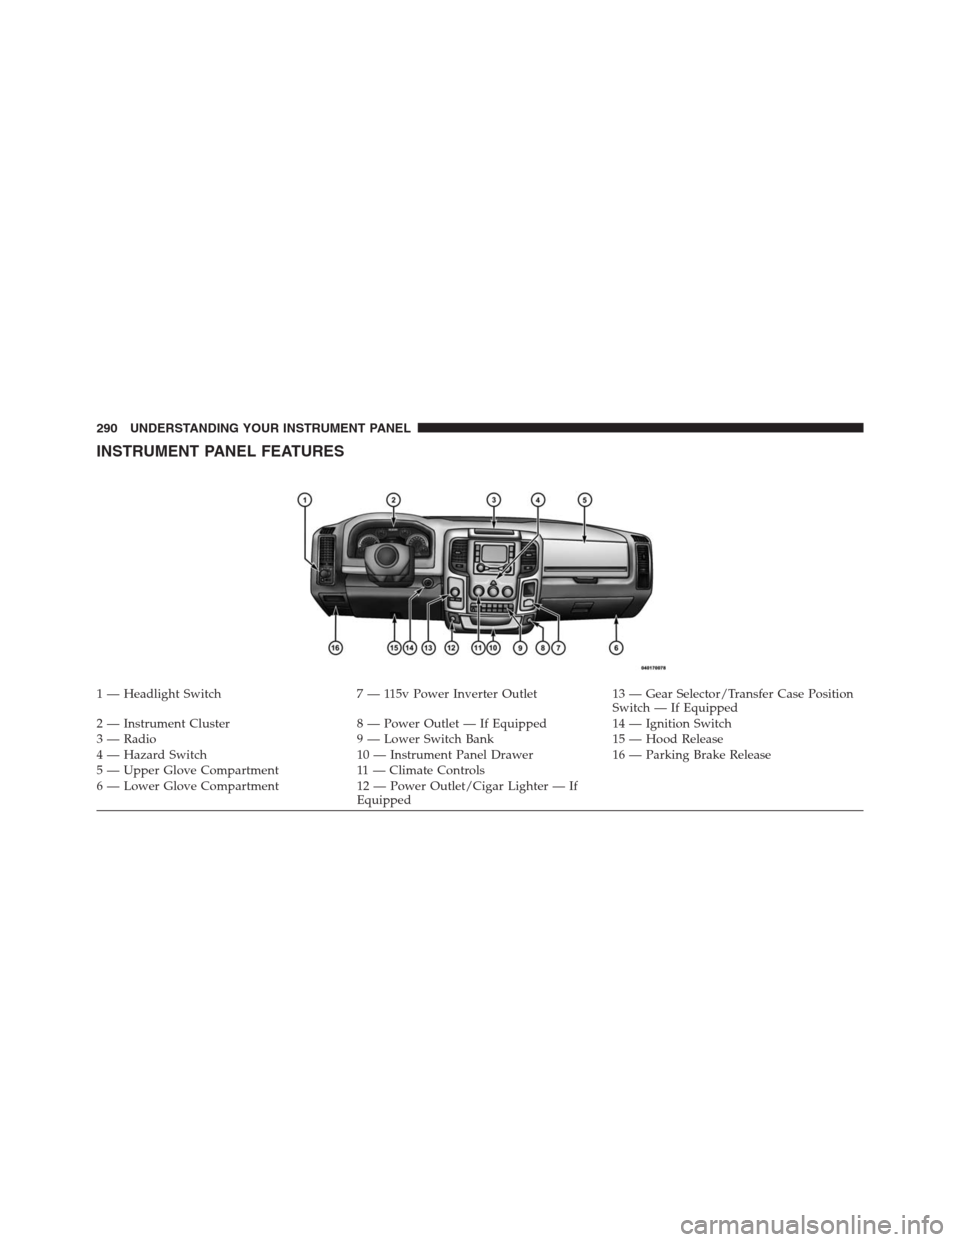 Ram 1500 2016 Owners Guide INSTRUMENT PANEL FEATURES
1 — Headlight Switch 7 — 115v Power Inverter Outlet 13 — Gear Selector/Transfer Case Position
Switch — If Equipped
2 — Instrument Cluster 8 — Power Outlet — If 